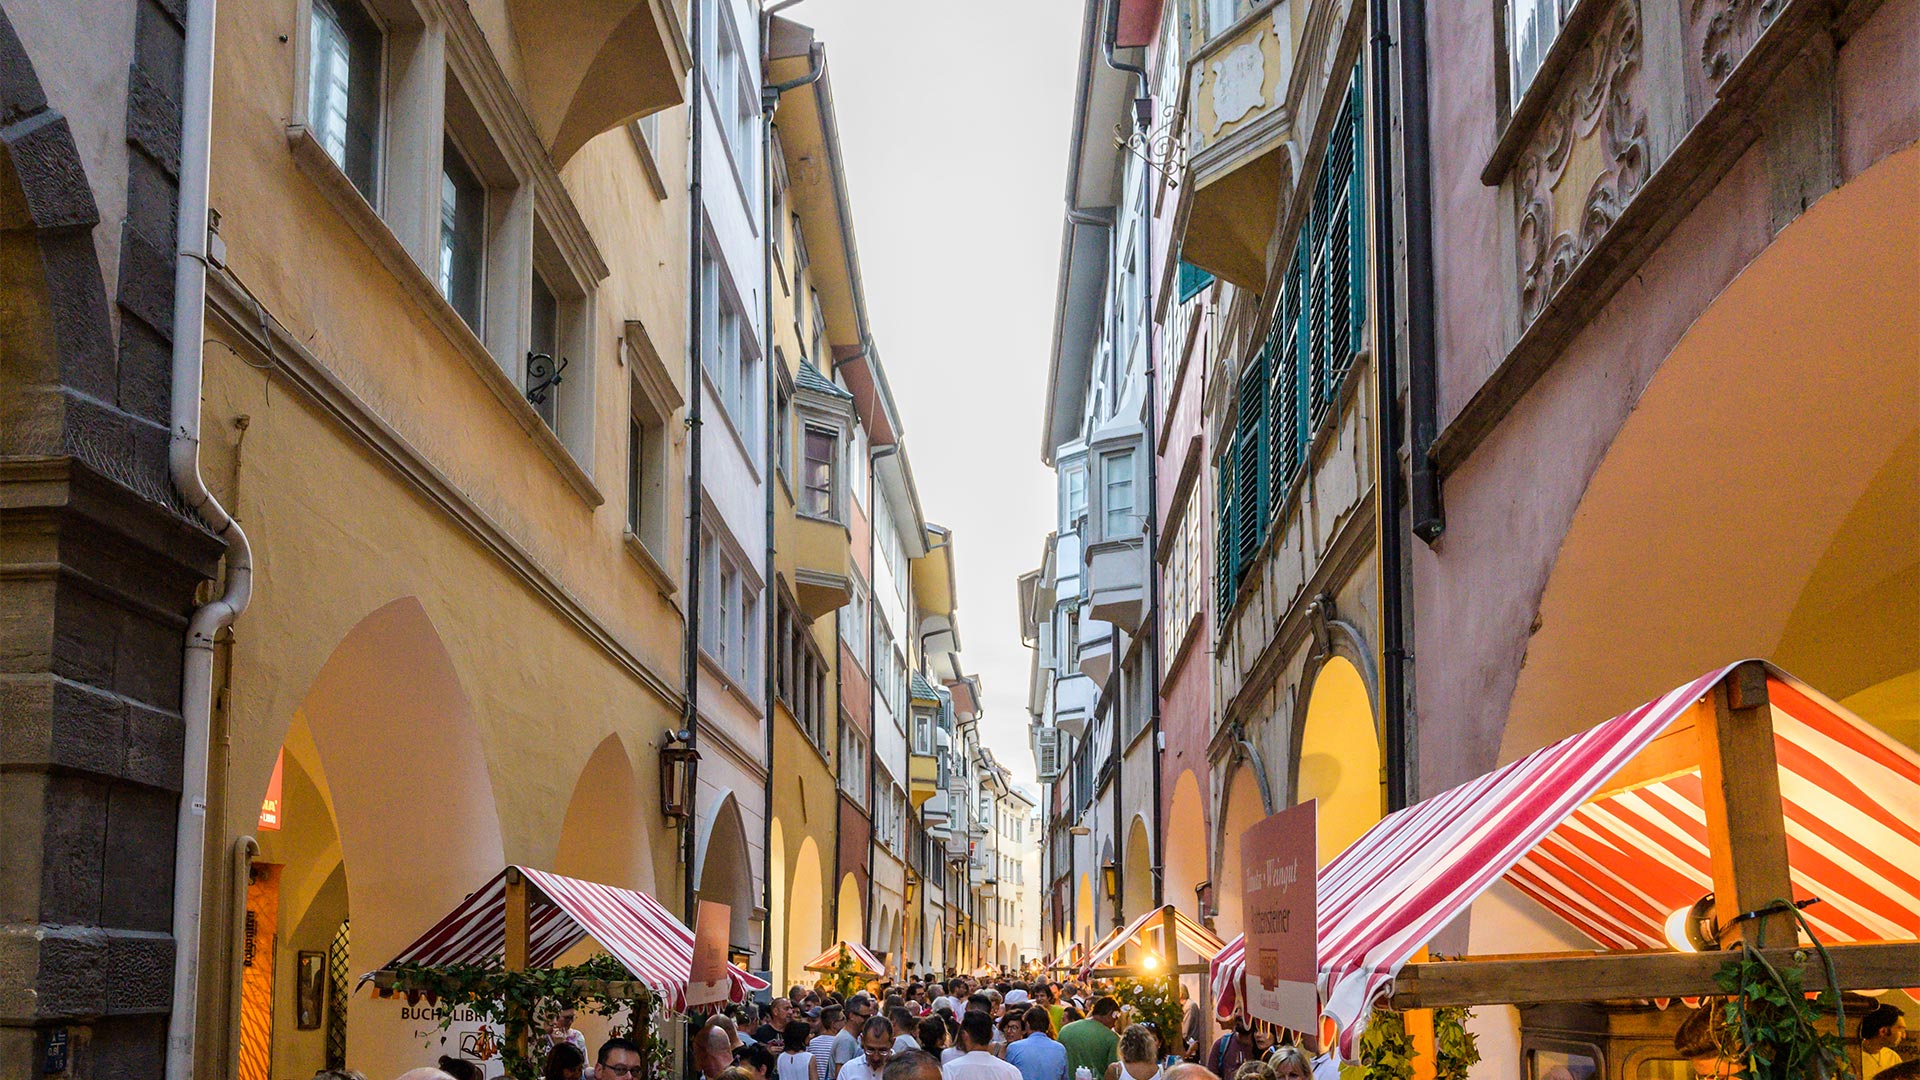 Narrow avenue between the arcades in the historic centre of Bolzano, crowded with tourists and citizens in the middle of an event.